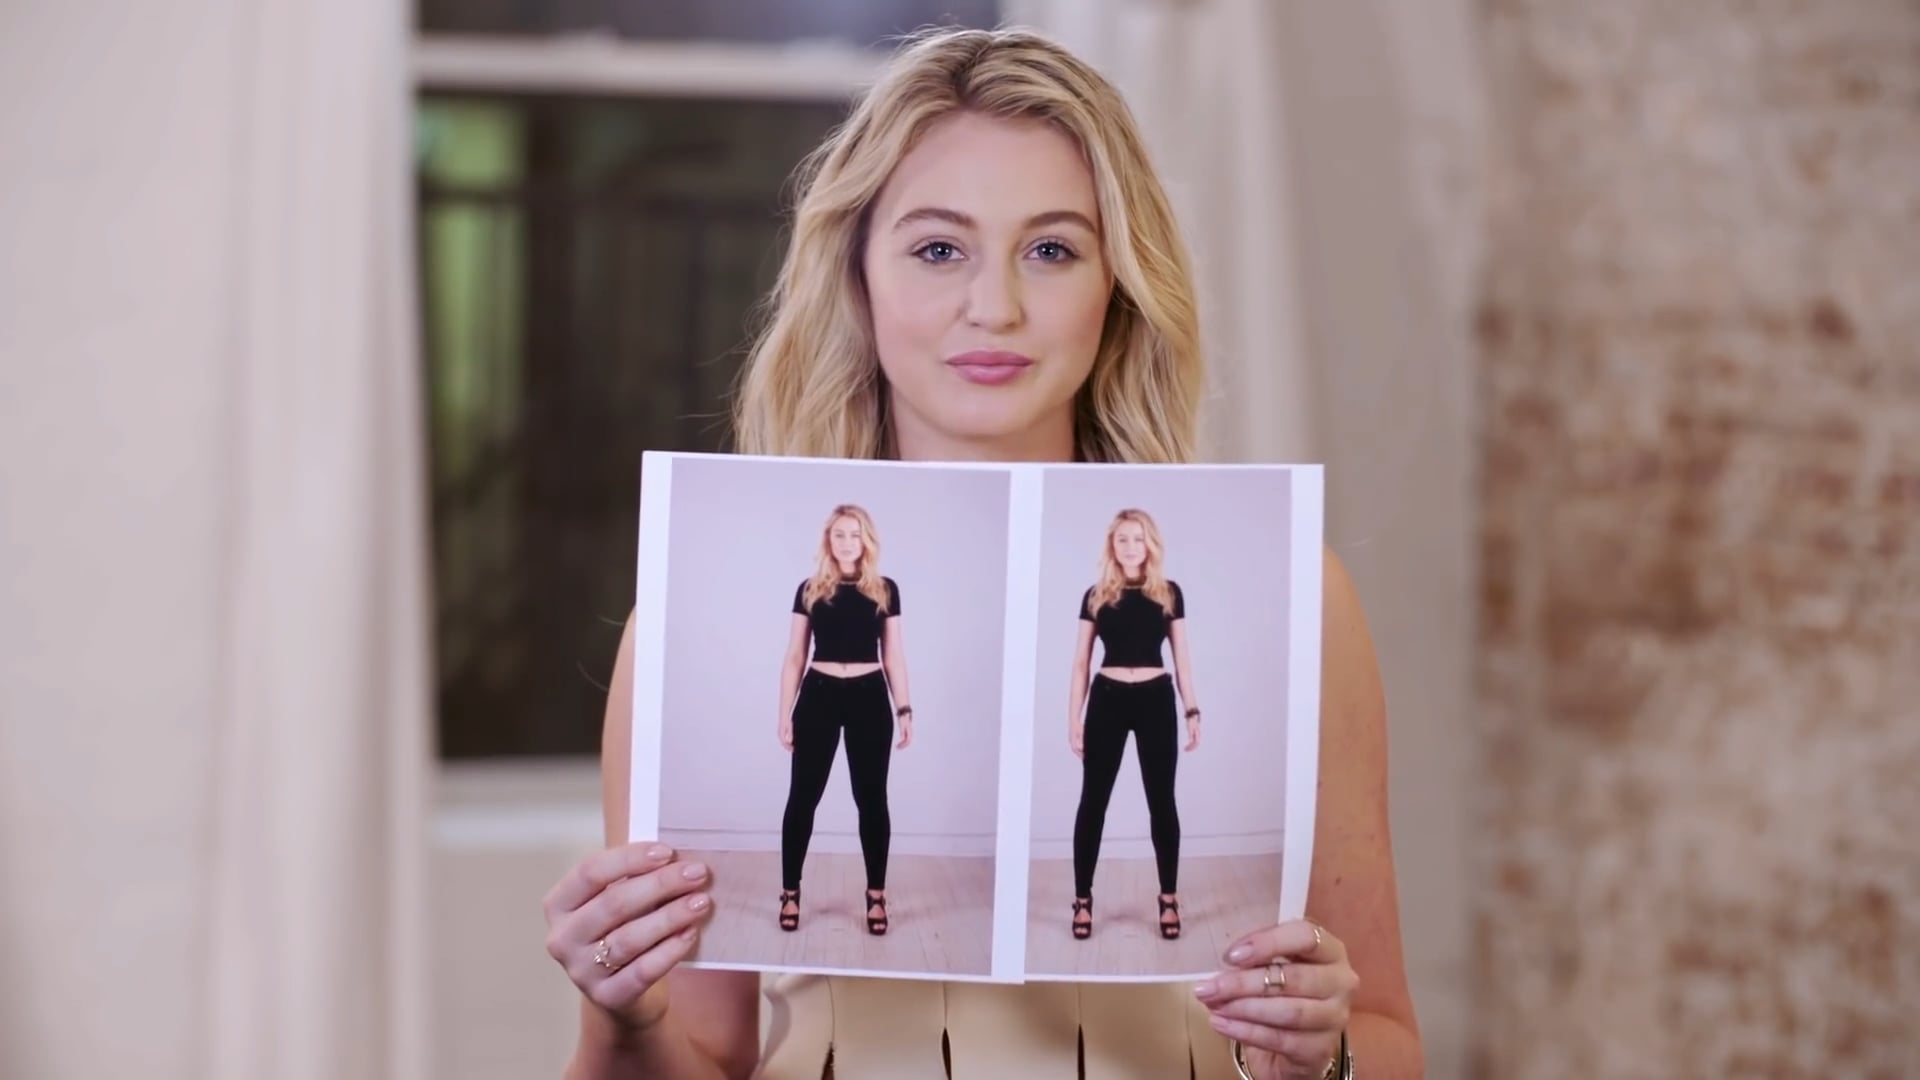 Fit Bit | Iskra Lawrence Goes Behind the Camera With Her Body-Positive Message | Elle | 4 Part Series | Bronze Telly Winner